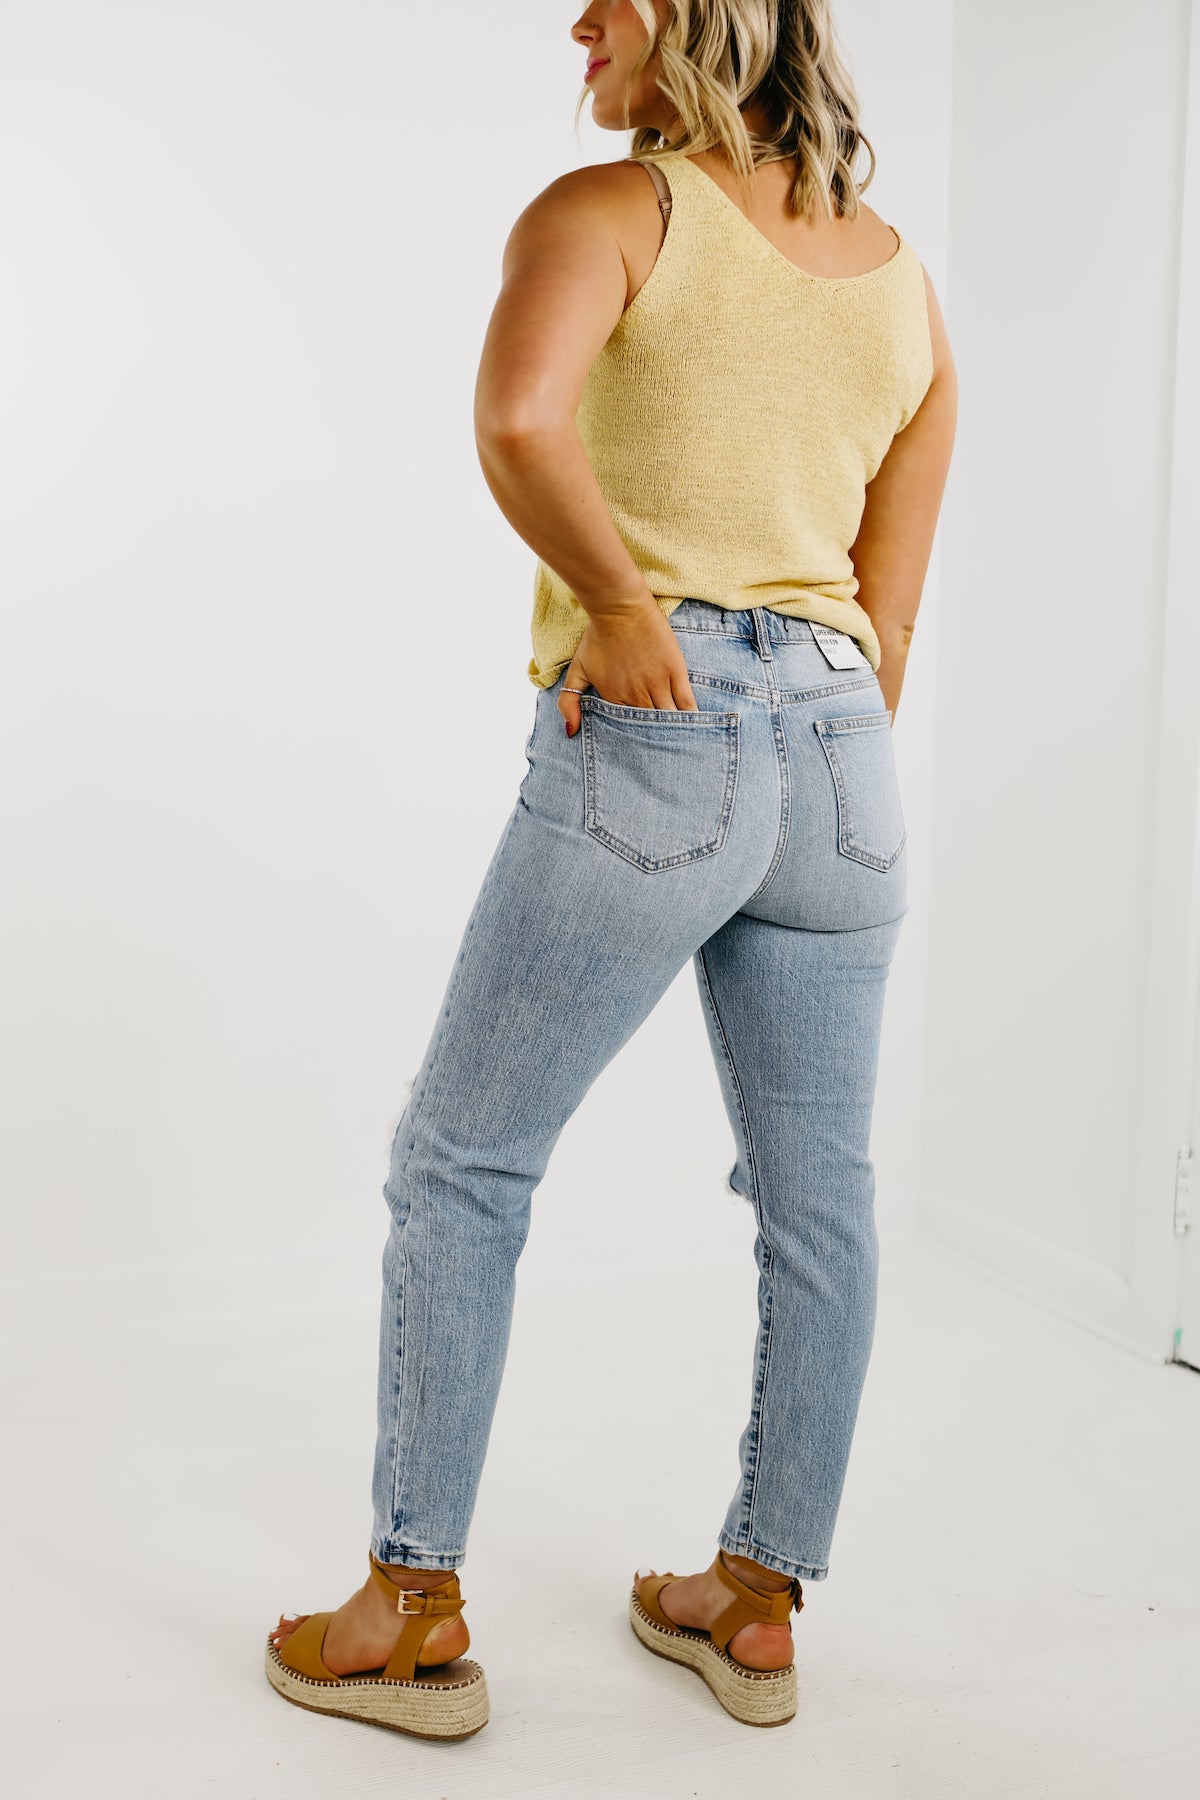 Buy women Jeans Online on Sale & Save up to 50% OFF - Pepe Jeans India